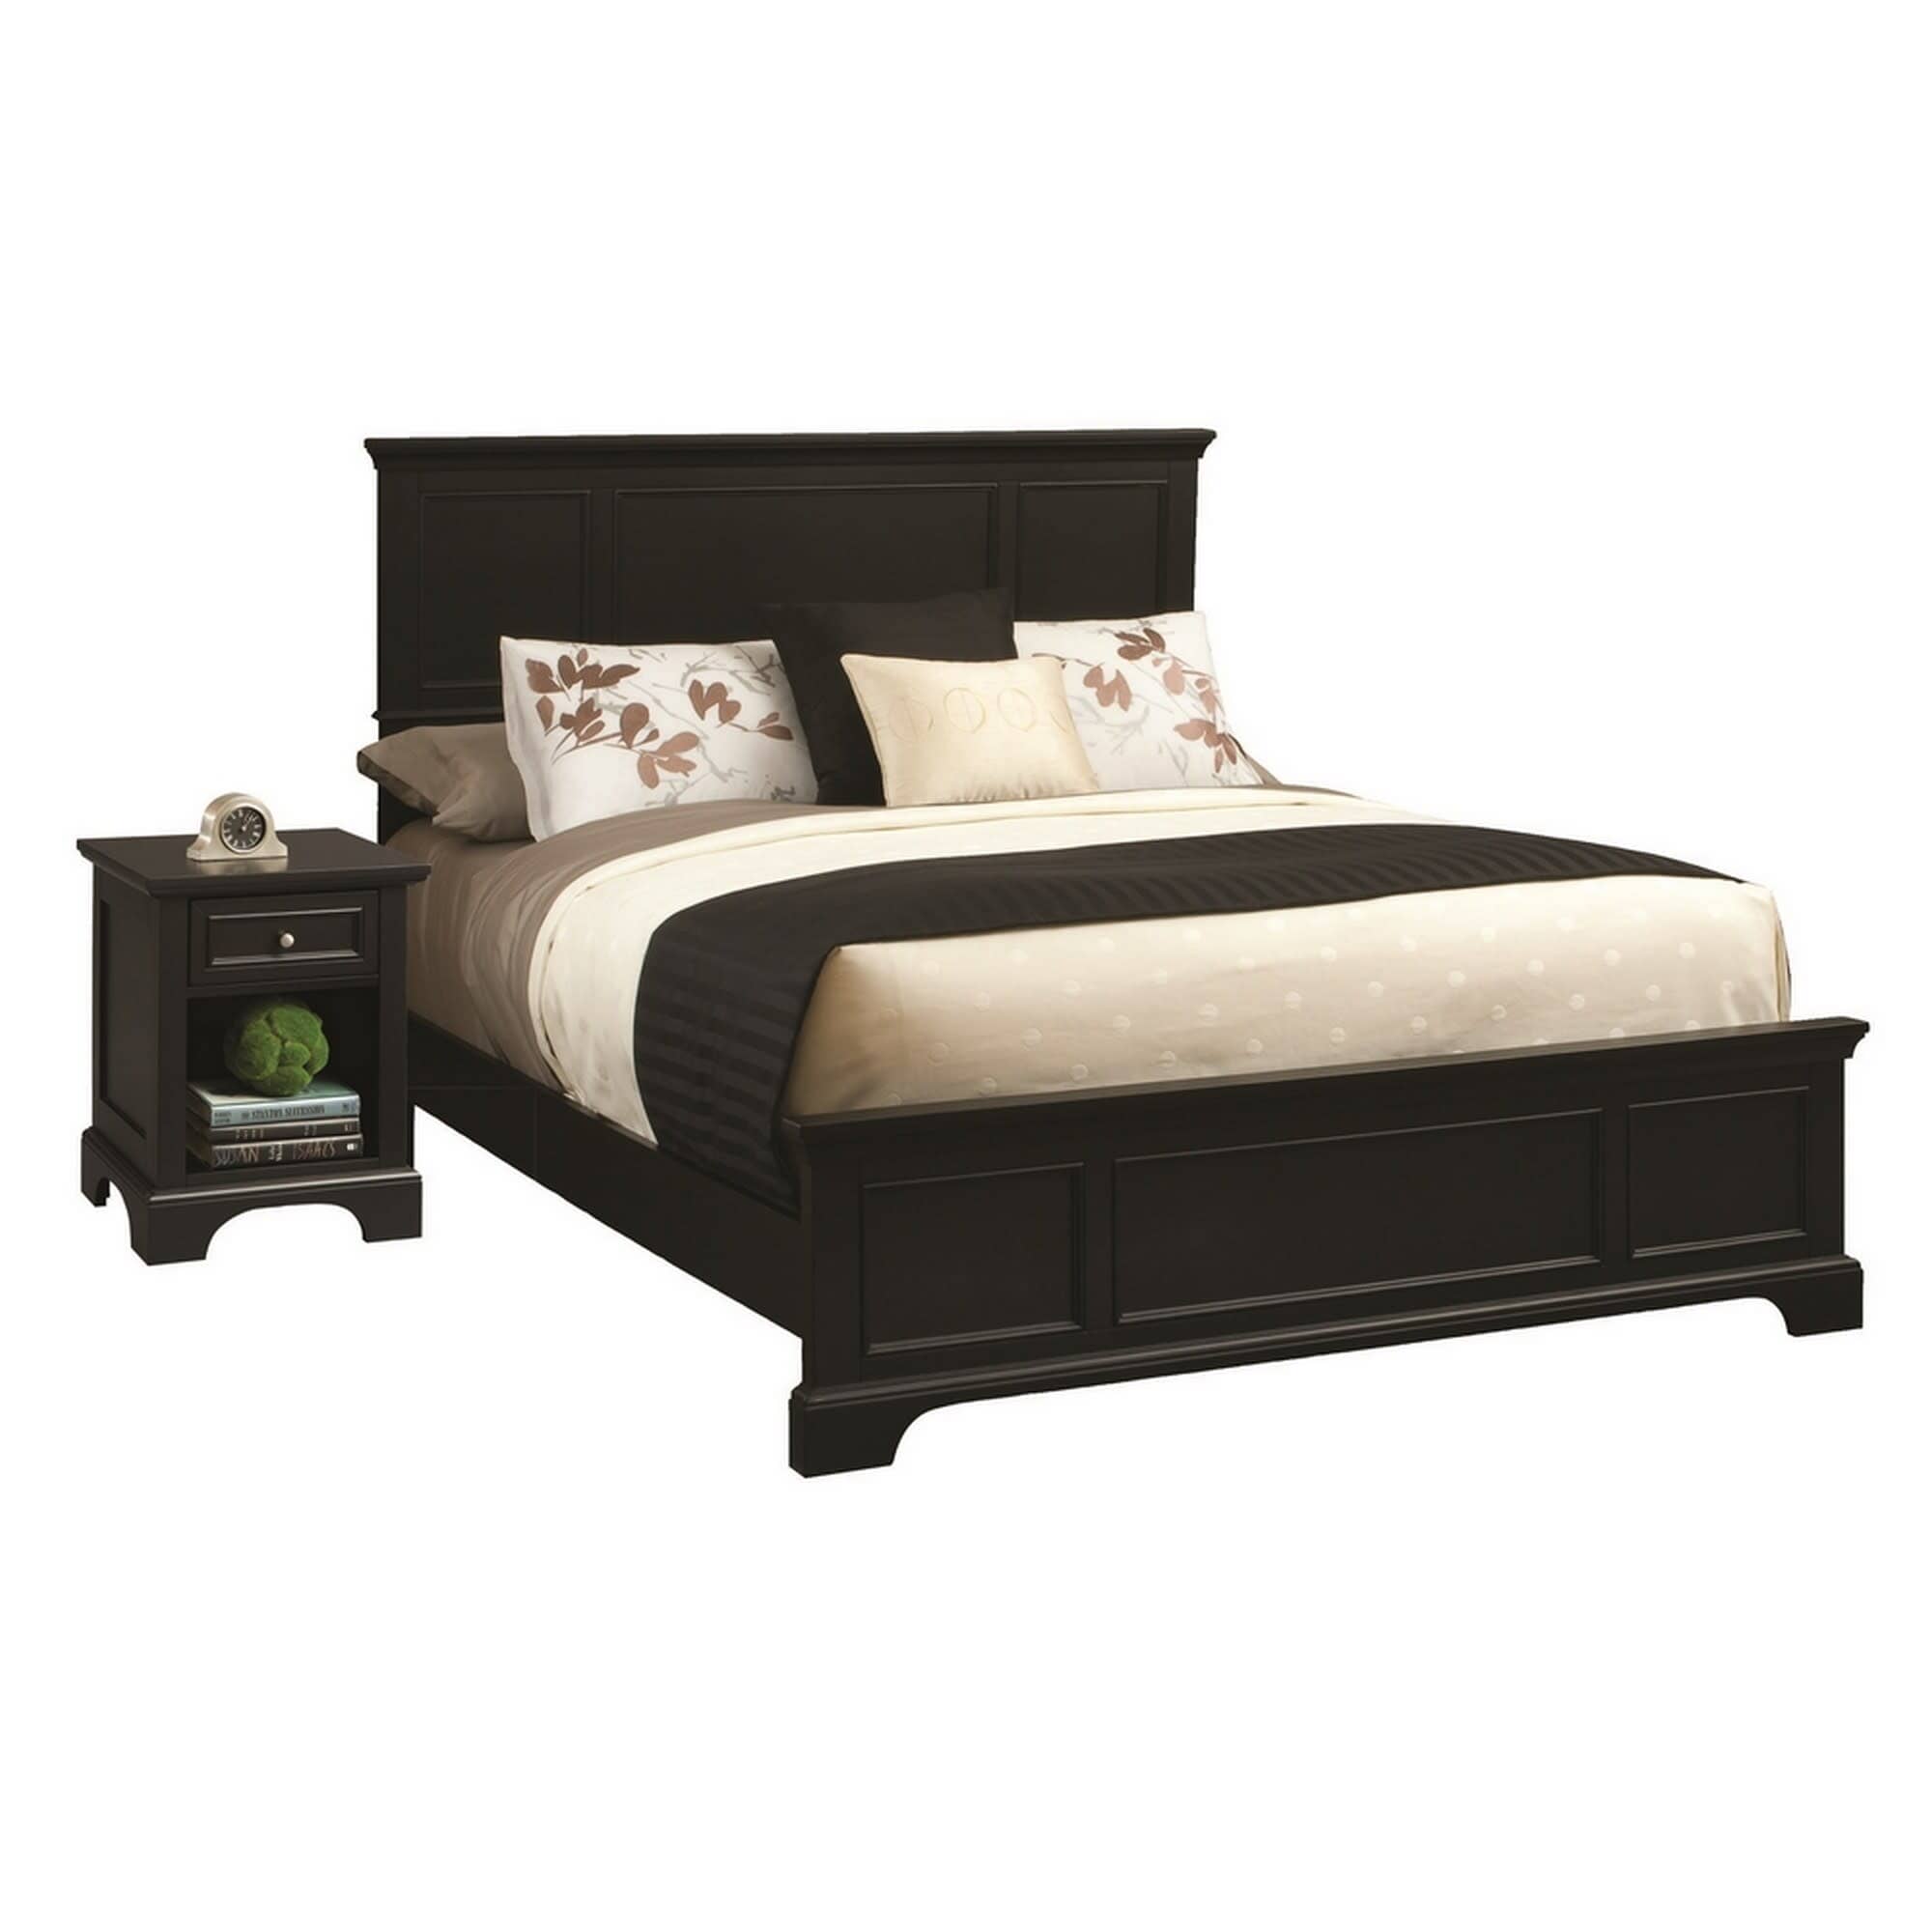 Traditional King Bed and Nightstand By Bedford King Bed Set Bedford